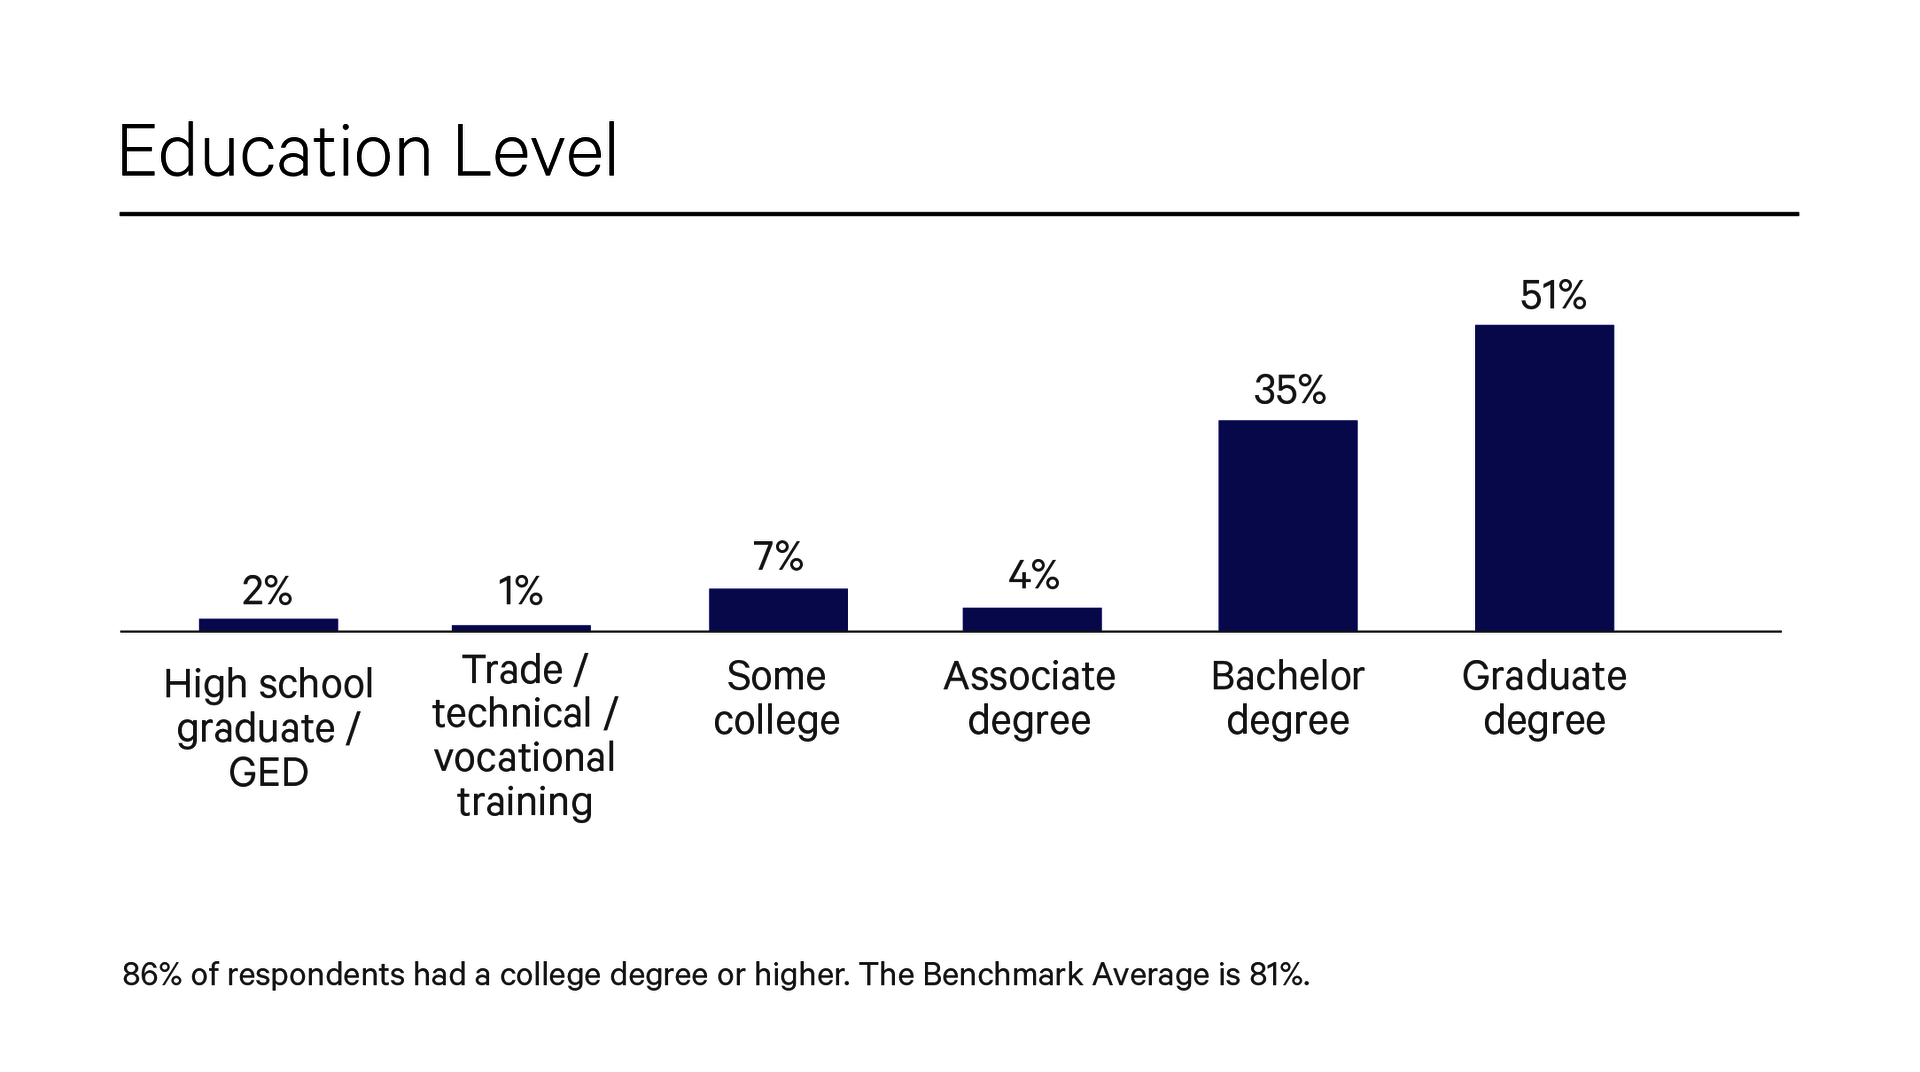 A bar graph titled “Education Level” showing that 2% of respondent’s highest level of education were “high school graduate / GED”, 1% were “trade / technical / vocational training”, 7% were “some college”, 4% were “associate degree”, 35% were “bachelor degree”, and 51% were “graduate degree”. Below the graph reads “86% of respondents had a college degree or higher. The benchmark average is 81%”. 